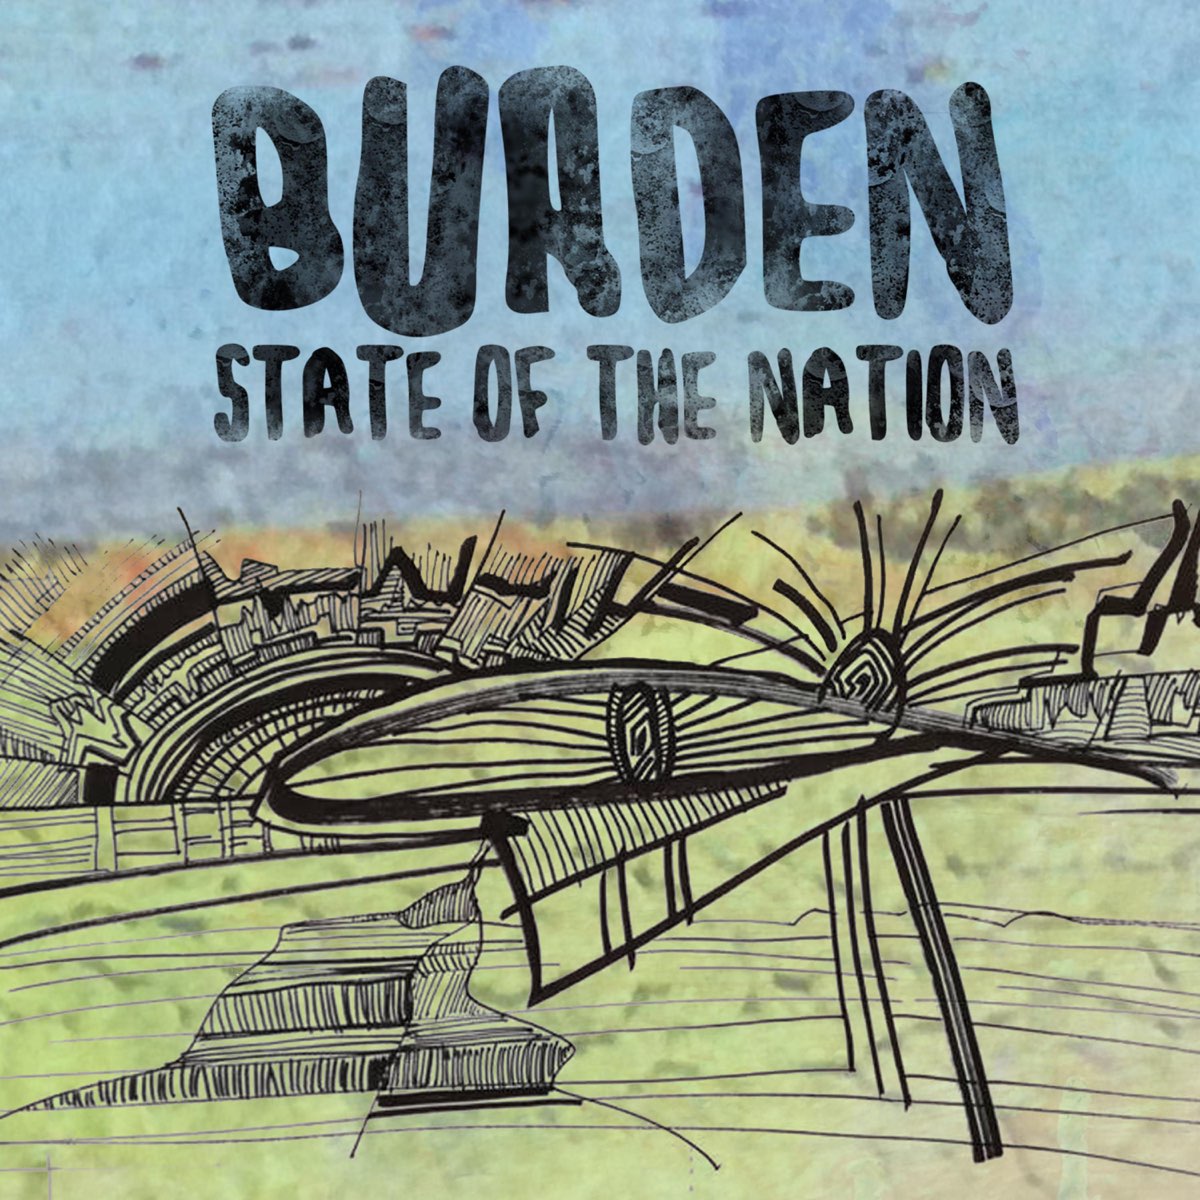 Burden to the State. Burden. New order State of the Nation Single. Burden with you. Single state